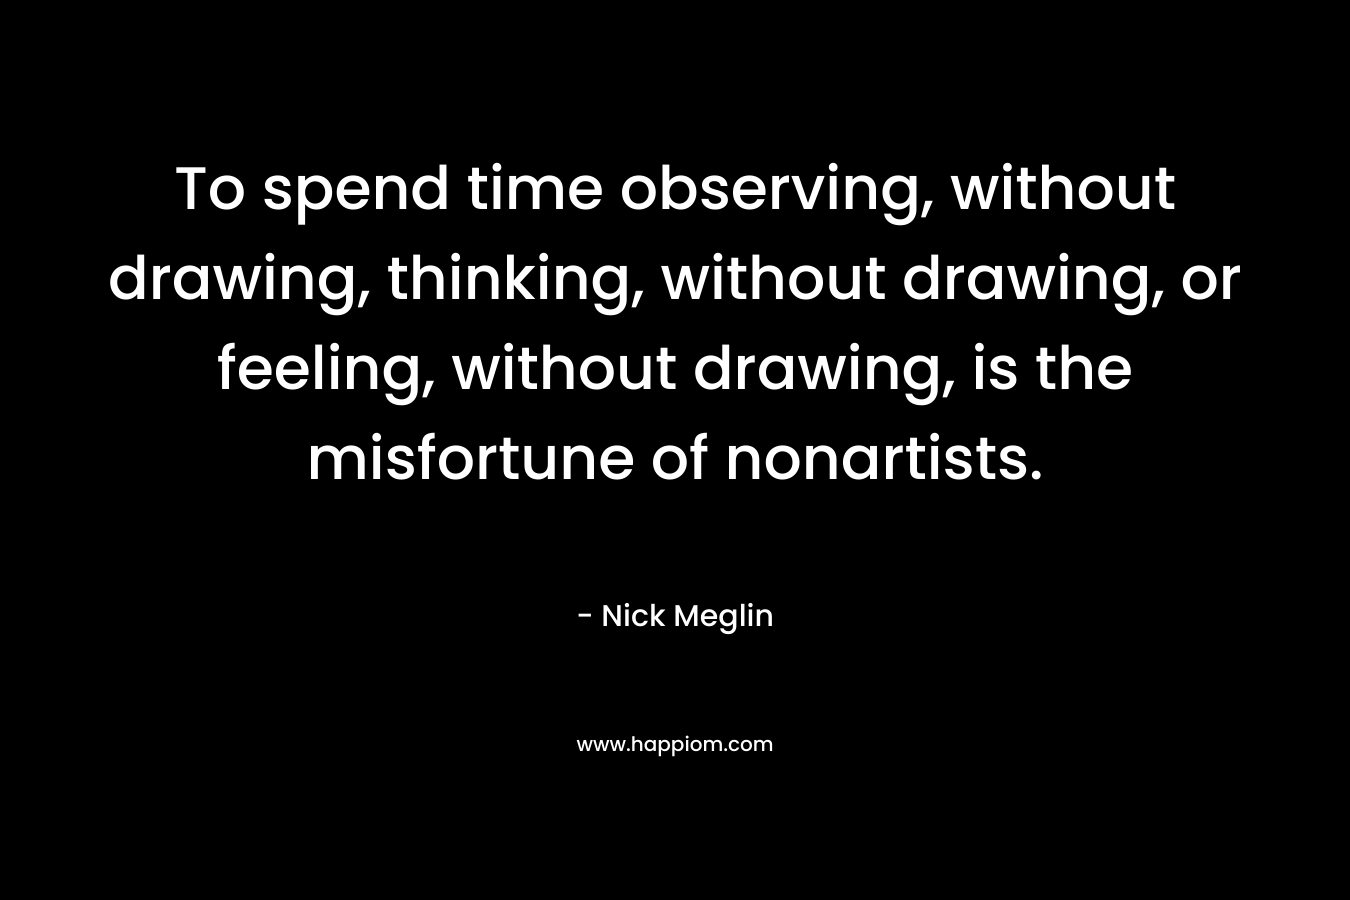 To spend time observing, without drawing, thinking, without drawing, or feeling, without drawing, is the misfortune of nonartists. – Nick Meglin